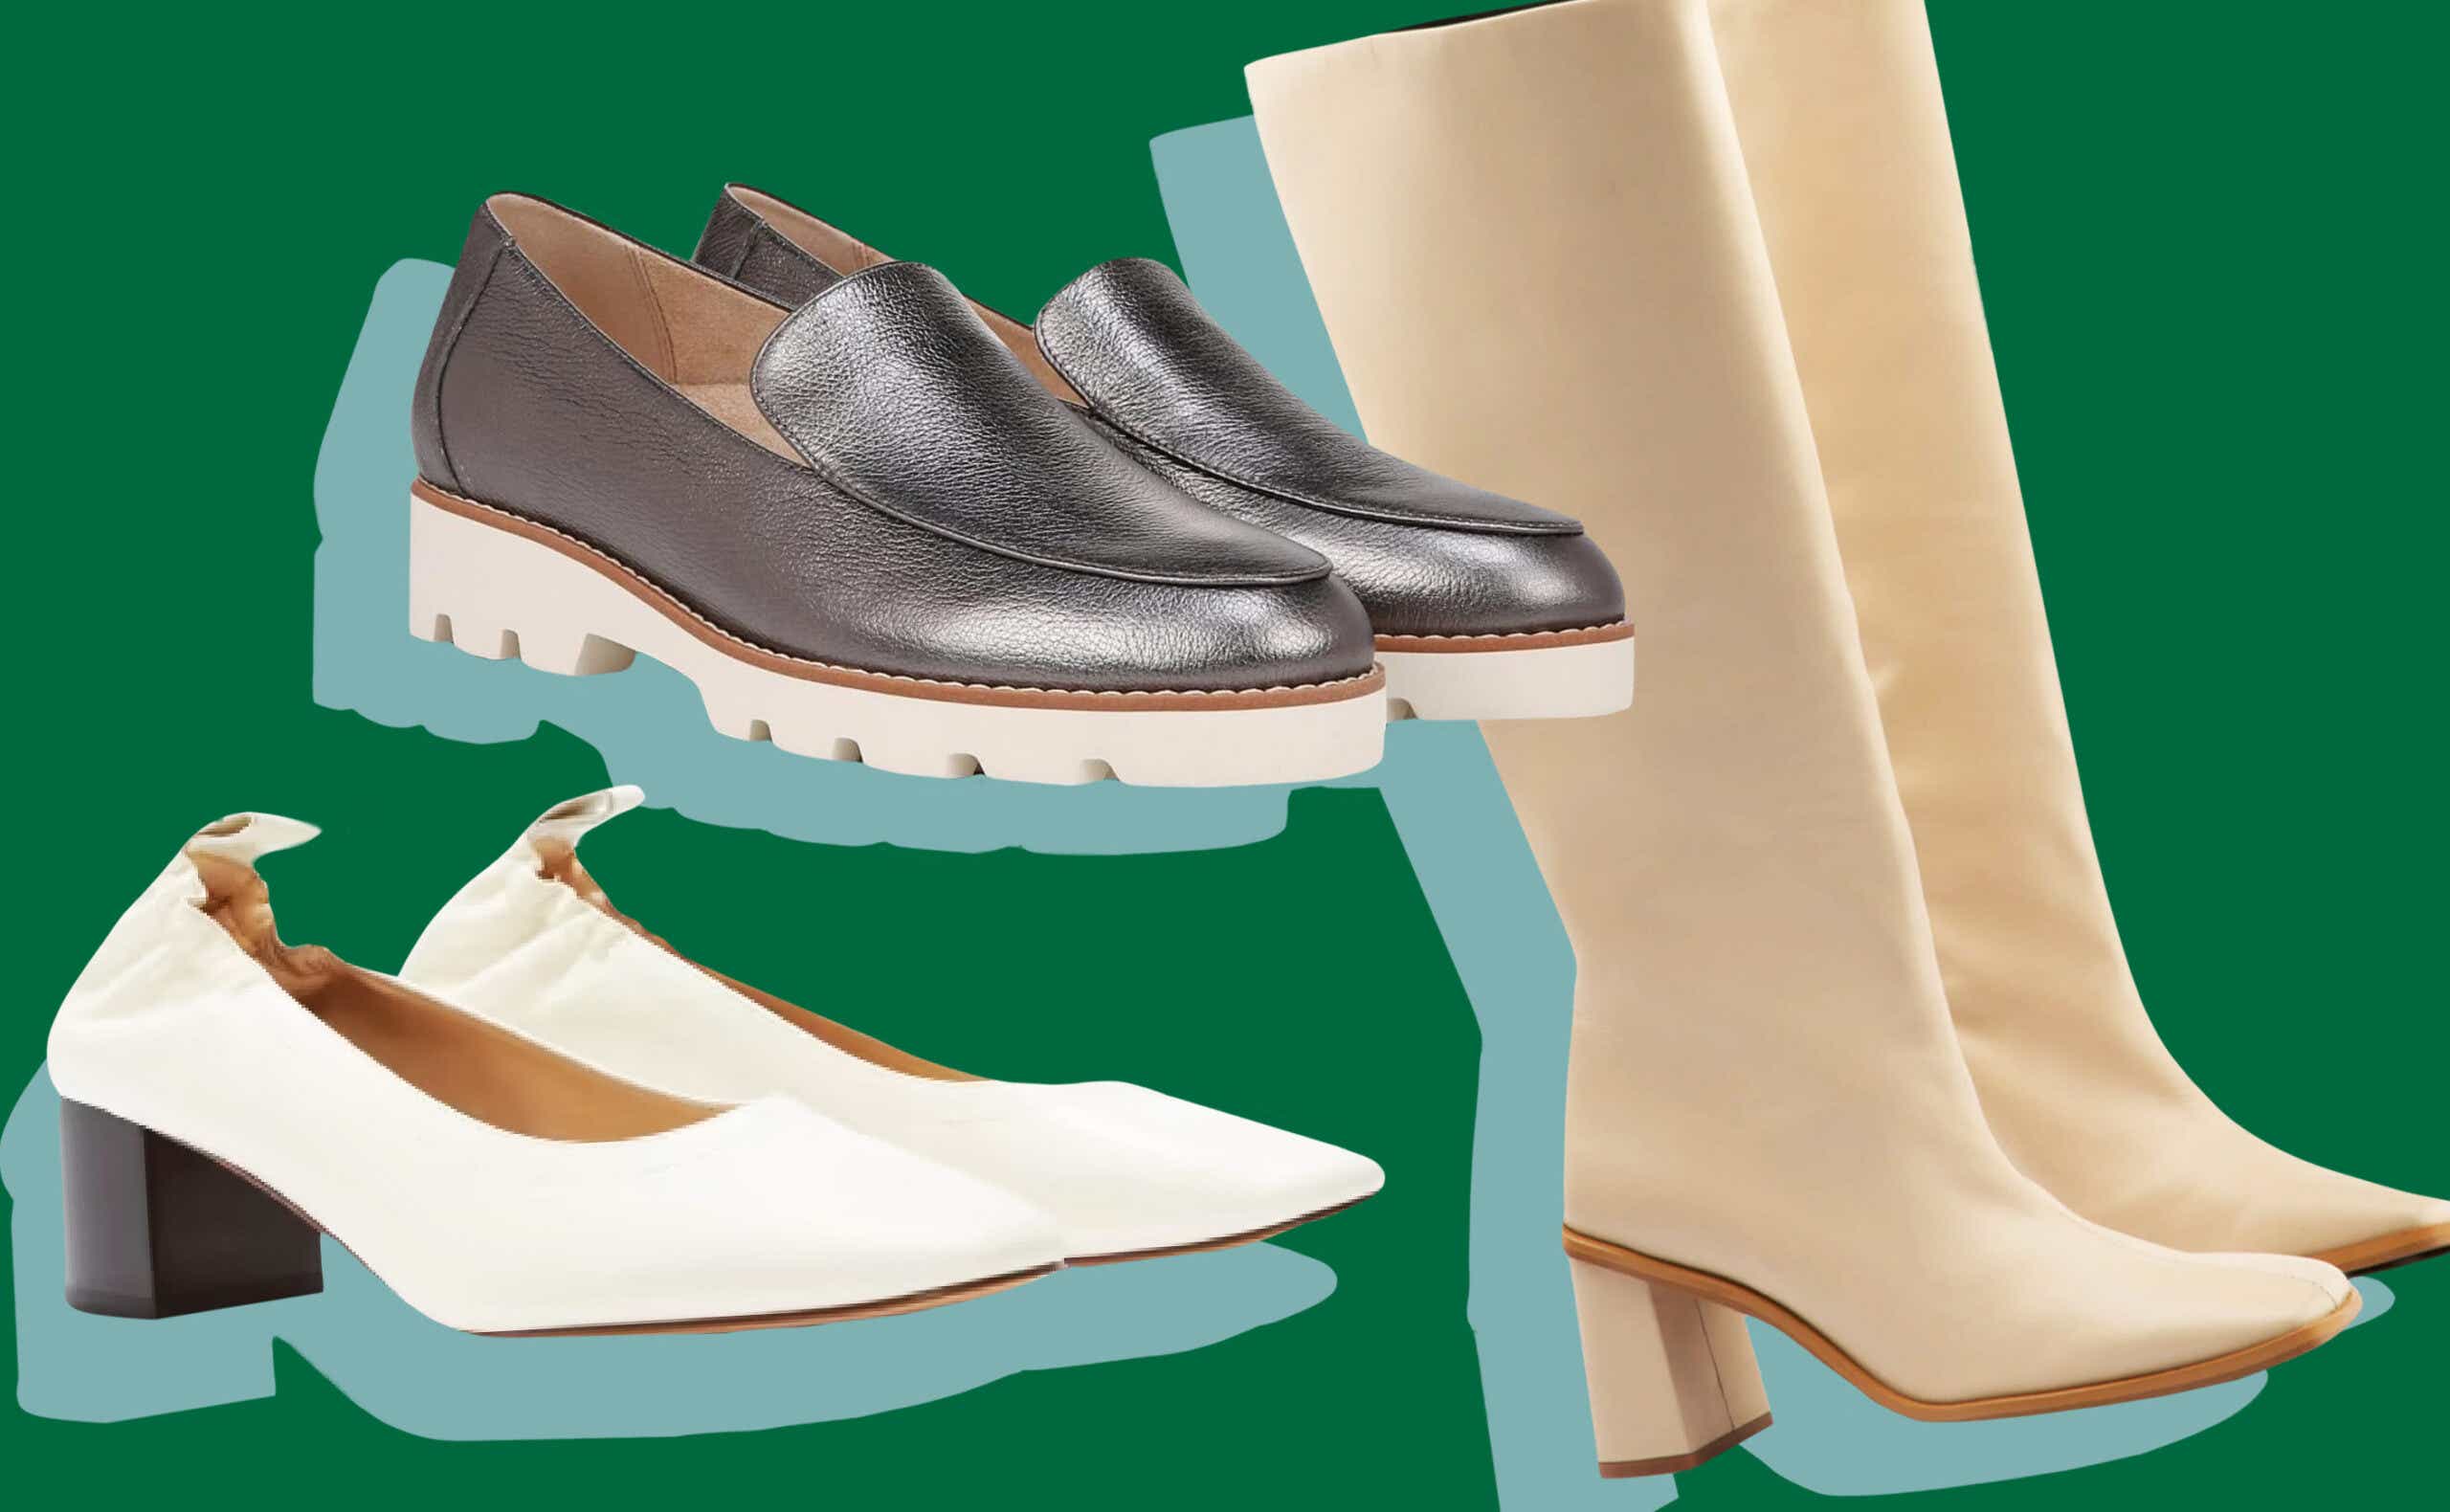 What Exactly Are Zero-Drop Shoes and Should You Try Them?